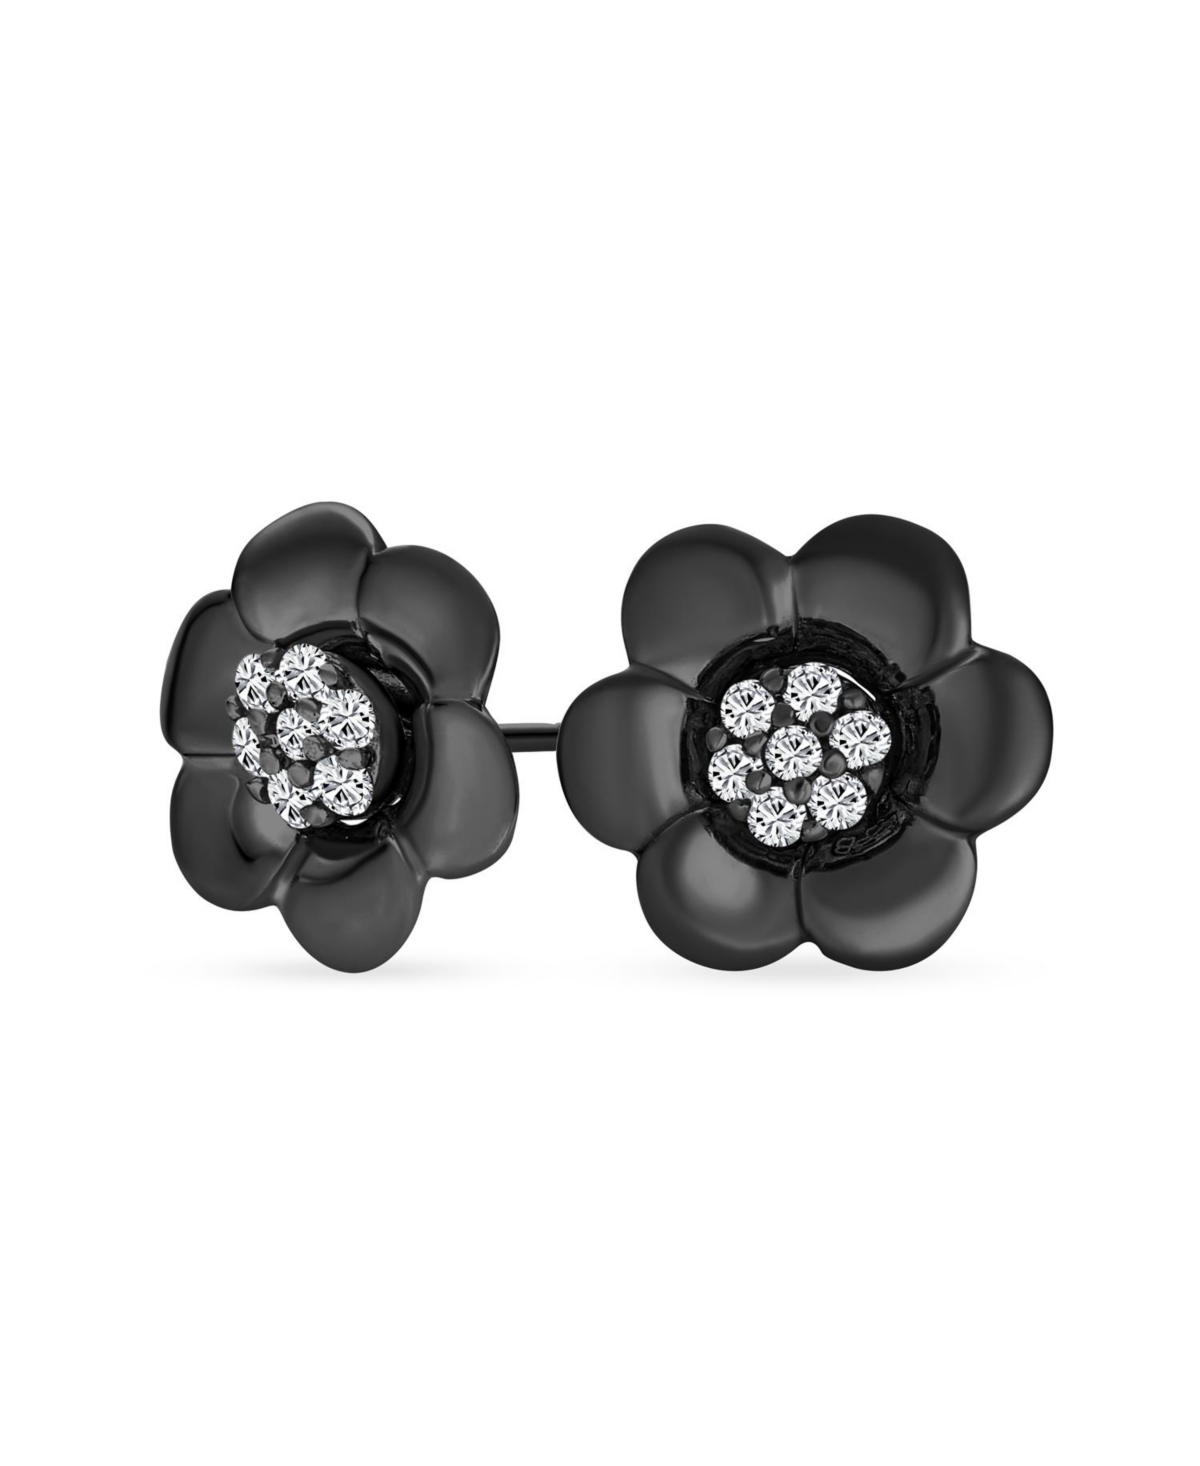 2 In 1 Removable Jackets Simple Danity Pave Cz Stud Center with Petal Flower Jacket Rose Stud Earrings For Women Teen Black Plated Sterl